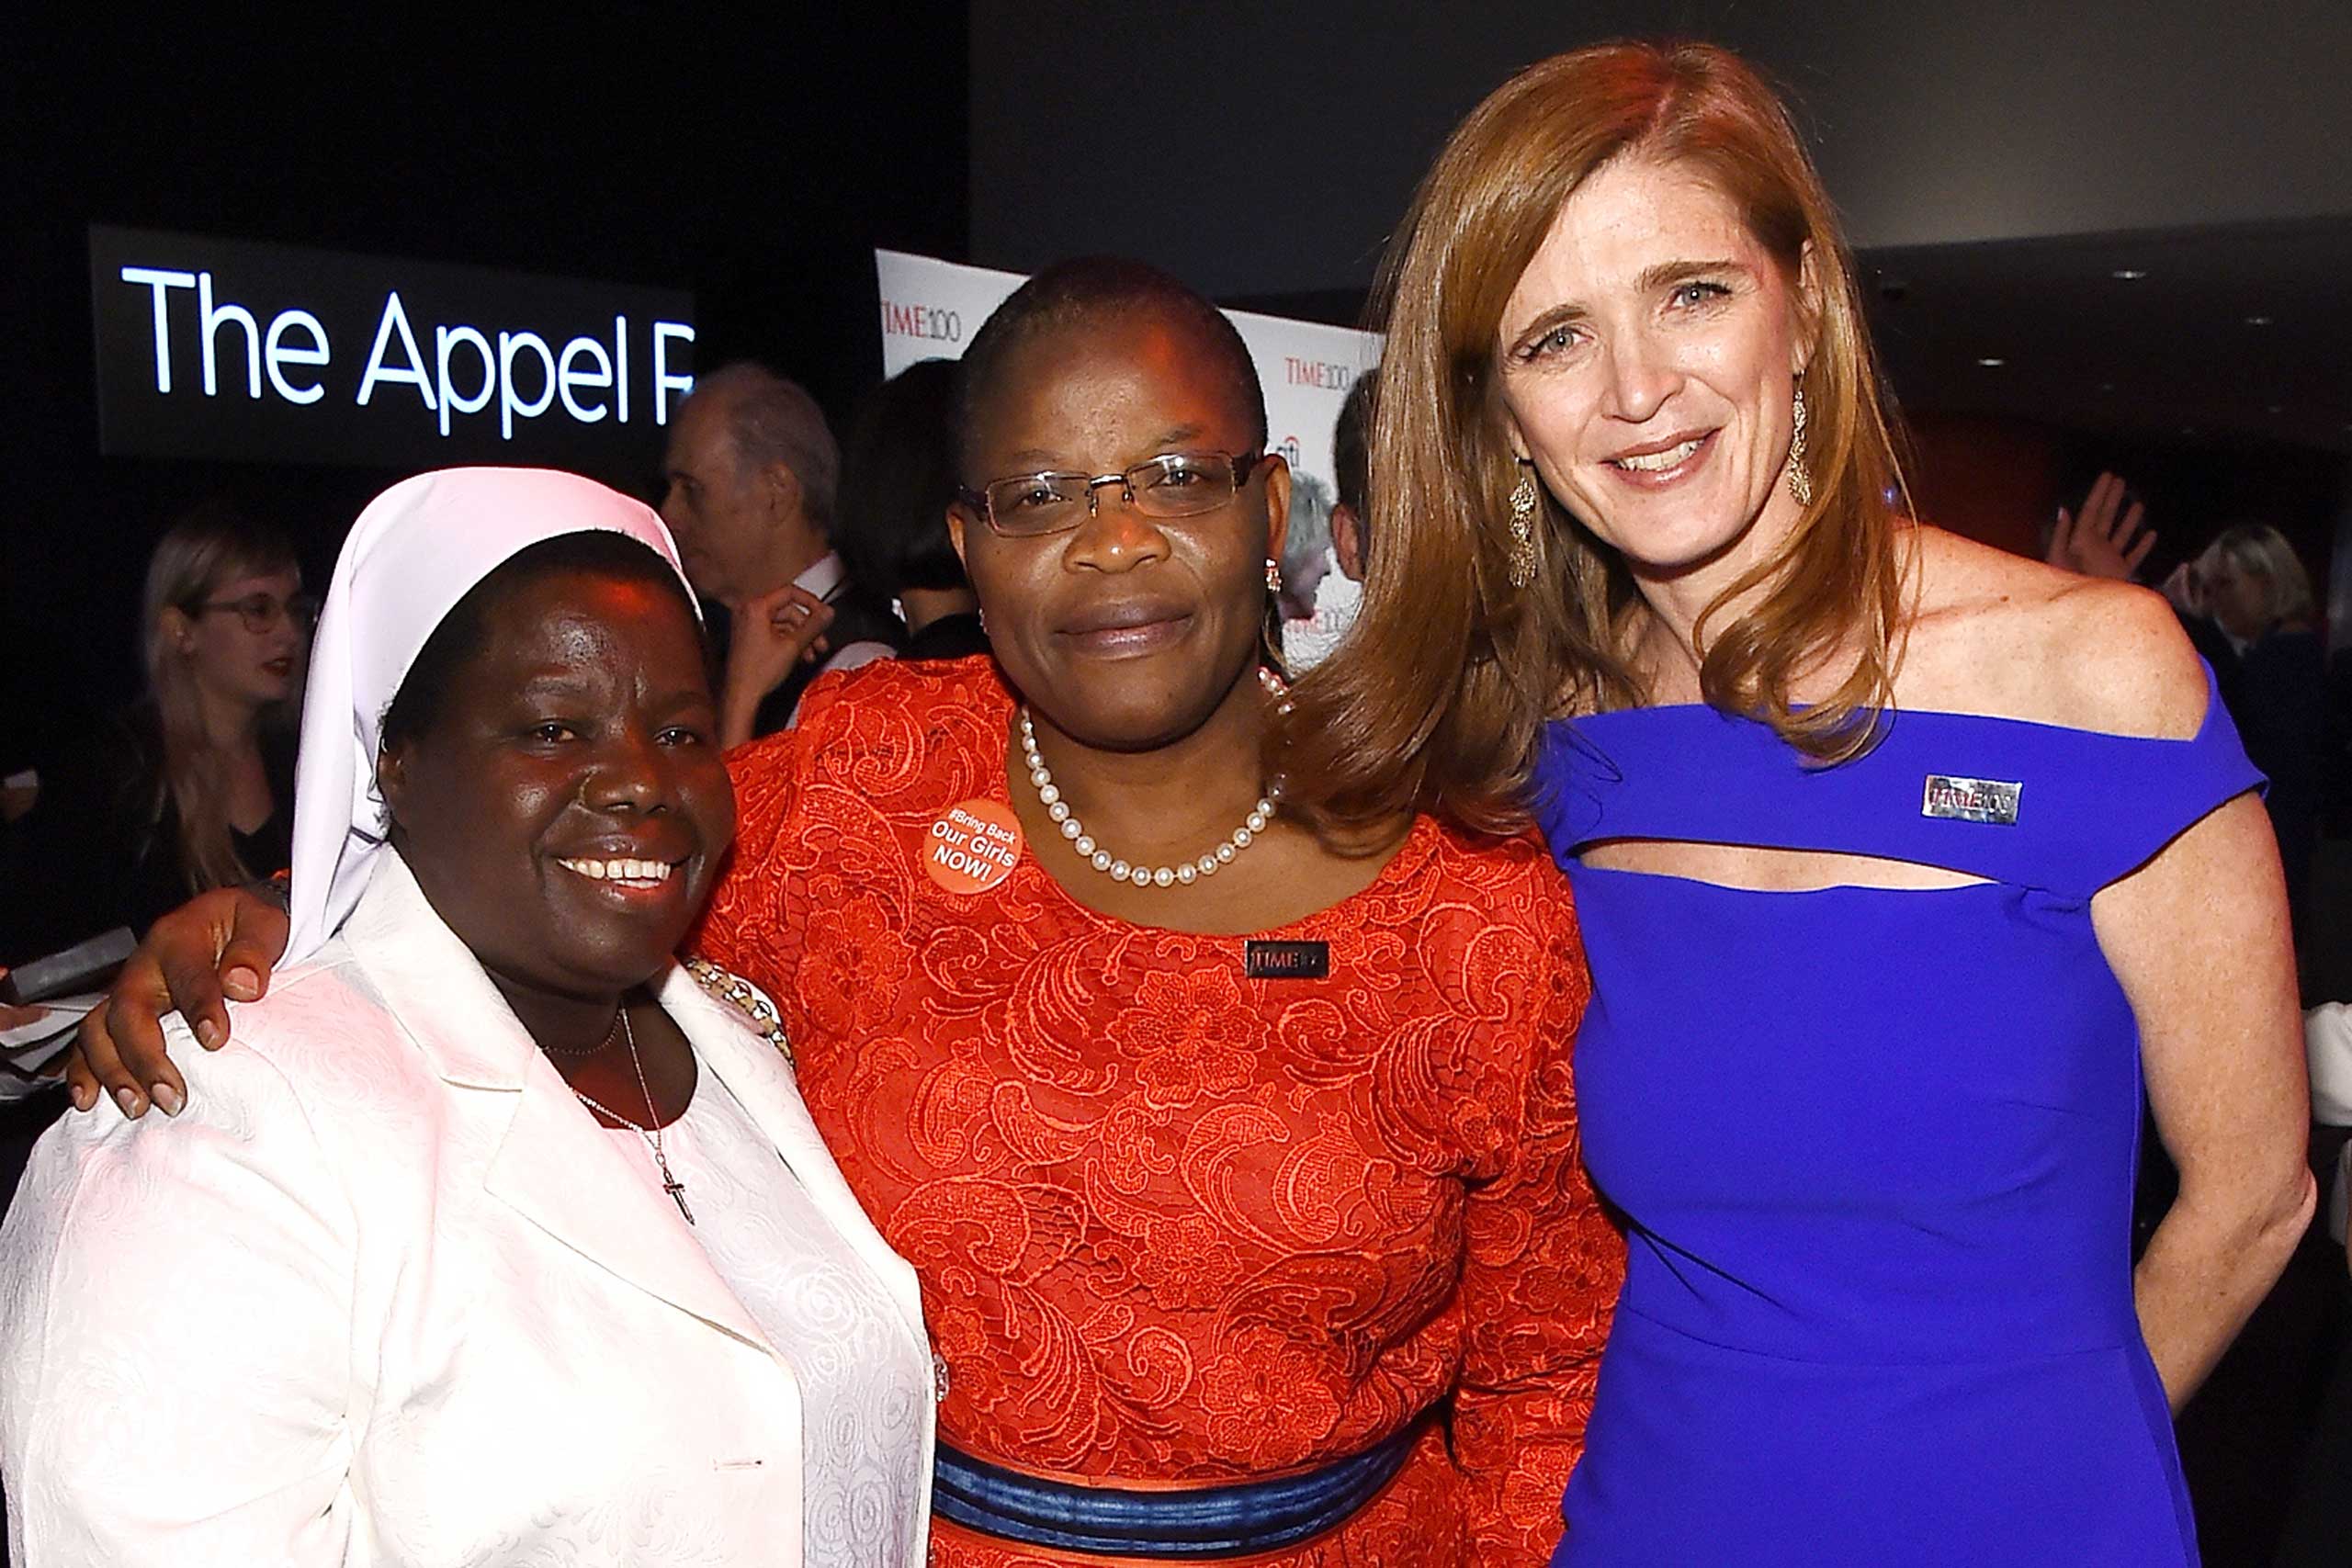 Past Time 100 honoree Sister Rosemary Nyirumbe of Saint Monica Girls Tailoring Centre, Obiageli Ezekwesili and Samantha Power attend the TIME 100 Gala at Jazz at Lincoln Center on April 21, 2015 in New York City. (Larry Busacca—Getty Images for TIME)